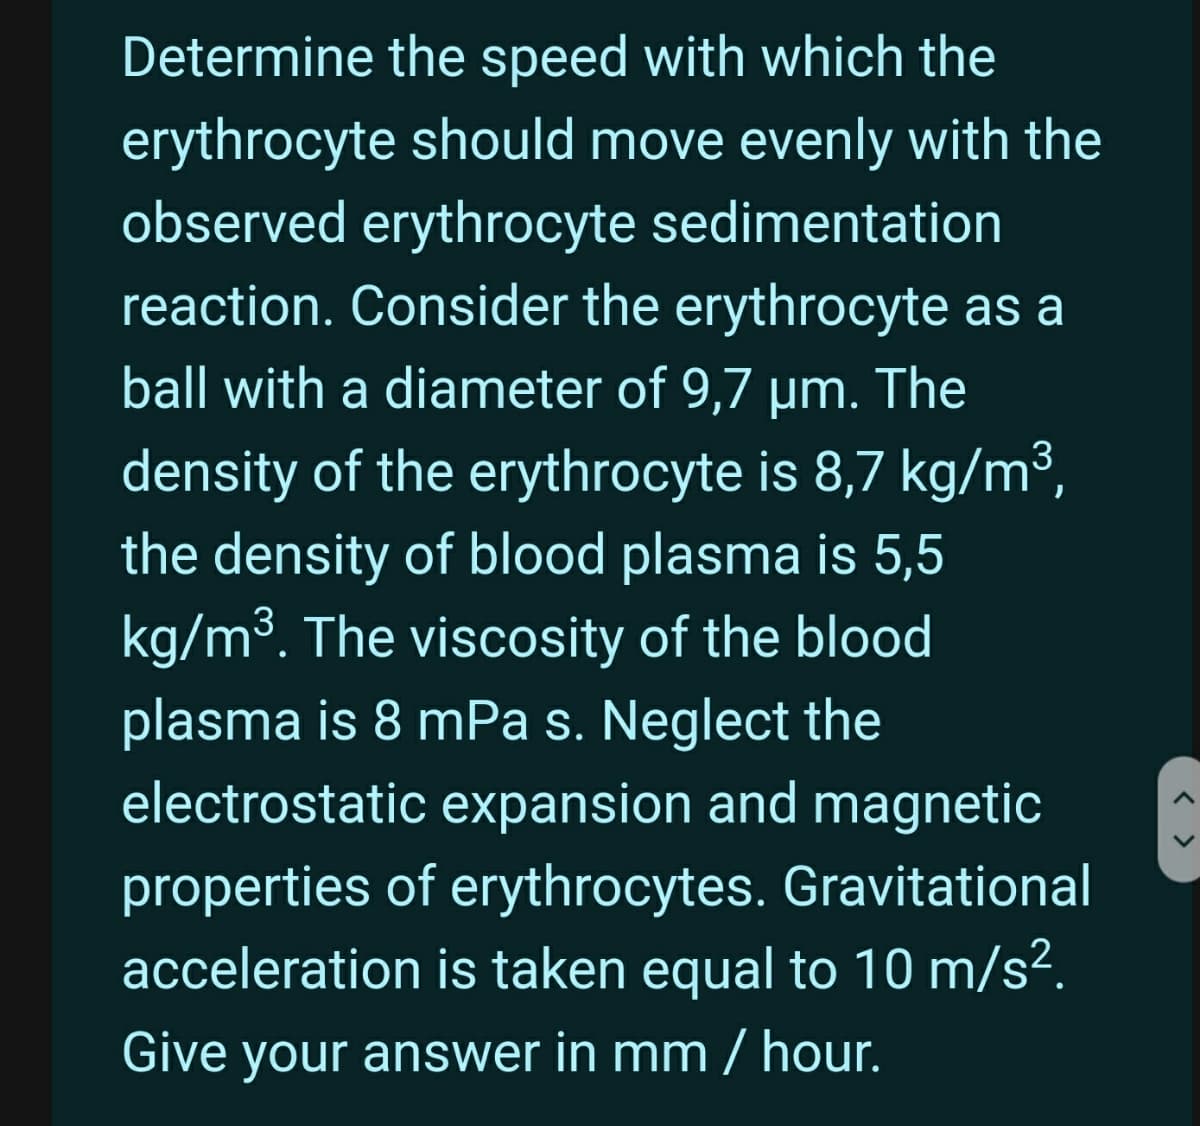 Determine the speed with which the
erythrocyte should move evenly with the
observed erythrocyte sedimentation
reaction. Consider the erythrocyte as a
ball with a diameter of 9,7 µm.
The
density of the erythrocyte is 8,7 kg/m³,
the density of blood plasma is 5,5
kg/m3. The viscosity of the blood
plasma is 8 mPa s. Neglect the
electrostatic expansion and magnetic
properties of erythrocytes. Gravitational
acceleration is taken equal to 10 m/s2.
Give your answer in mm / hour.
< >
